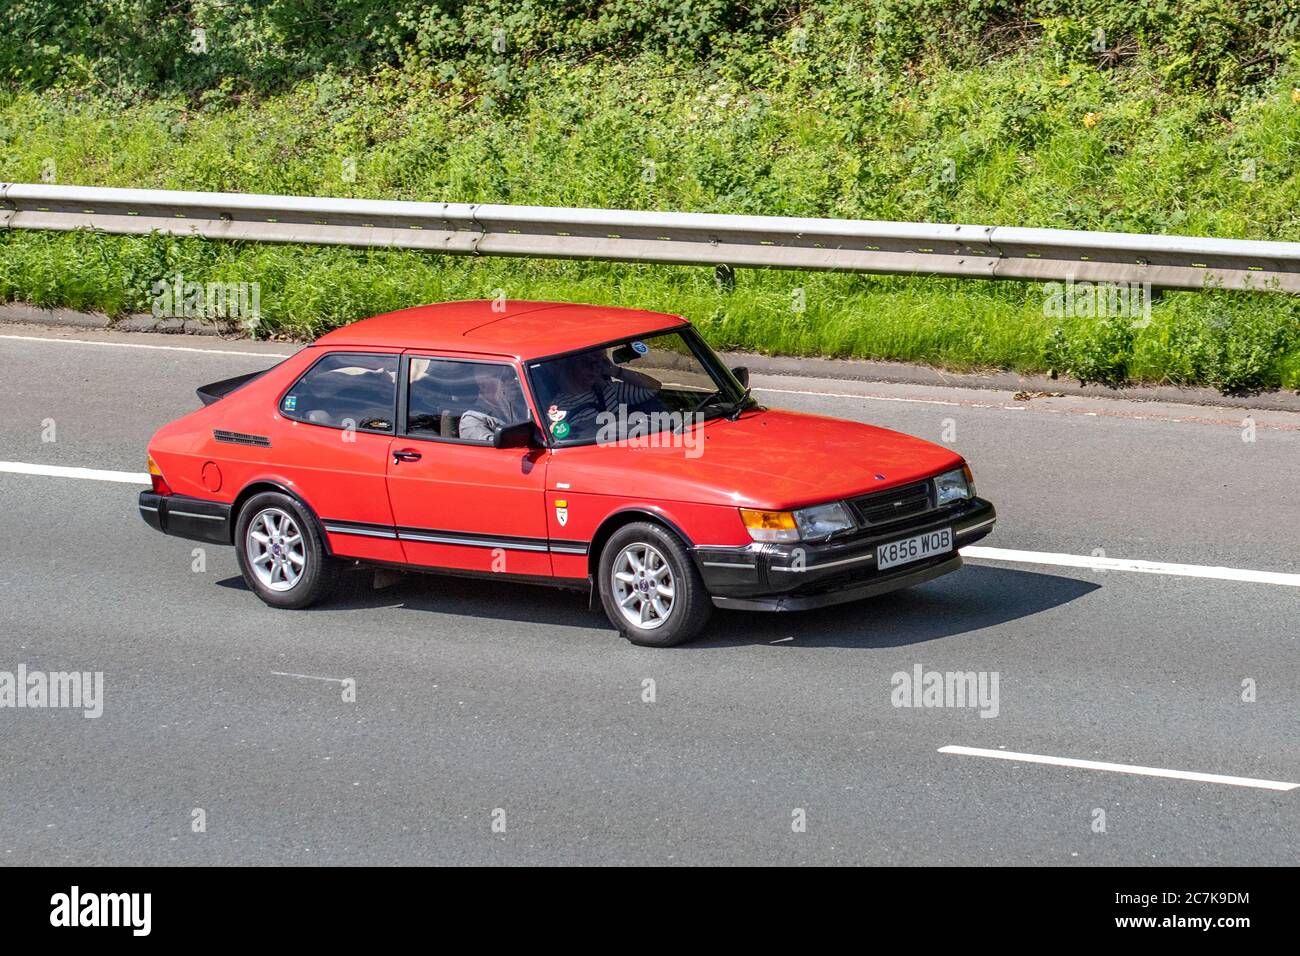 K856WOB 1992 red Saab 900 S Turbo; Vehicular traffic moving vehicles, cars driving vehicle on UK roads, motors, motoring on the M6 motorway highway network. Stock Photo